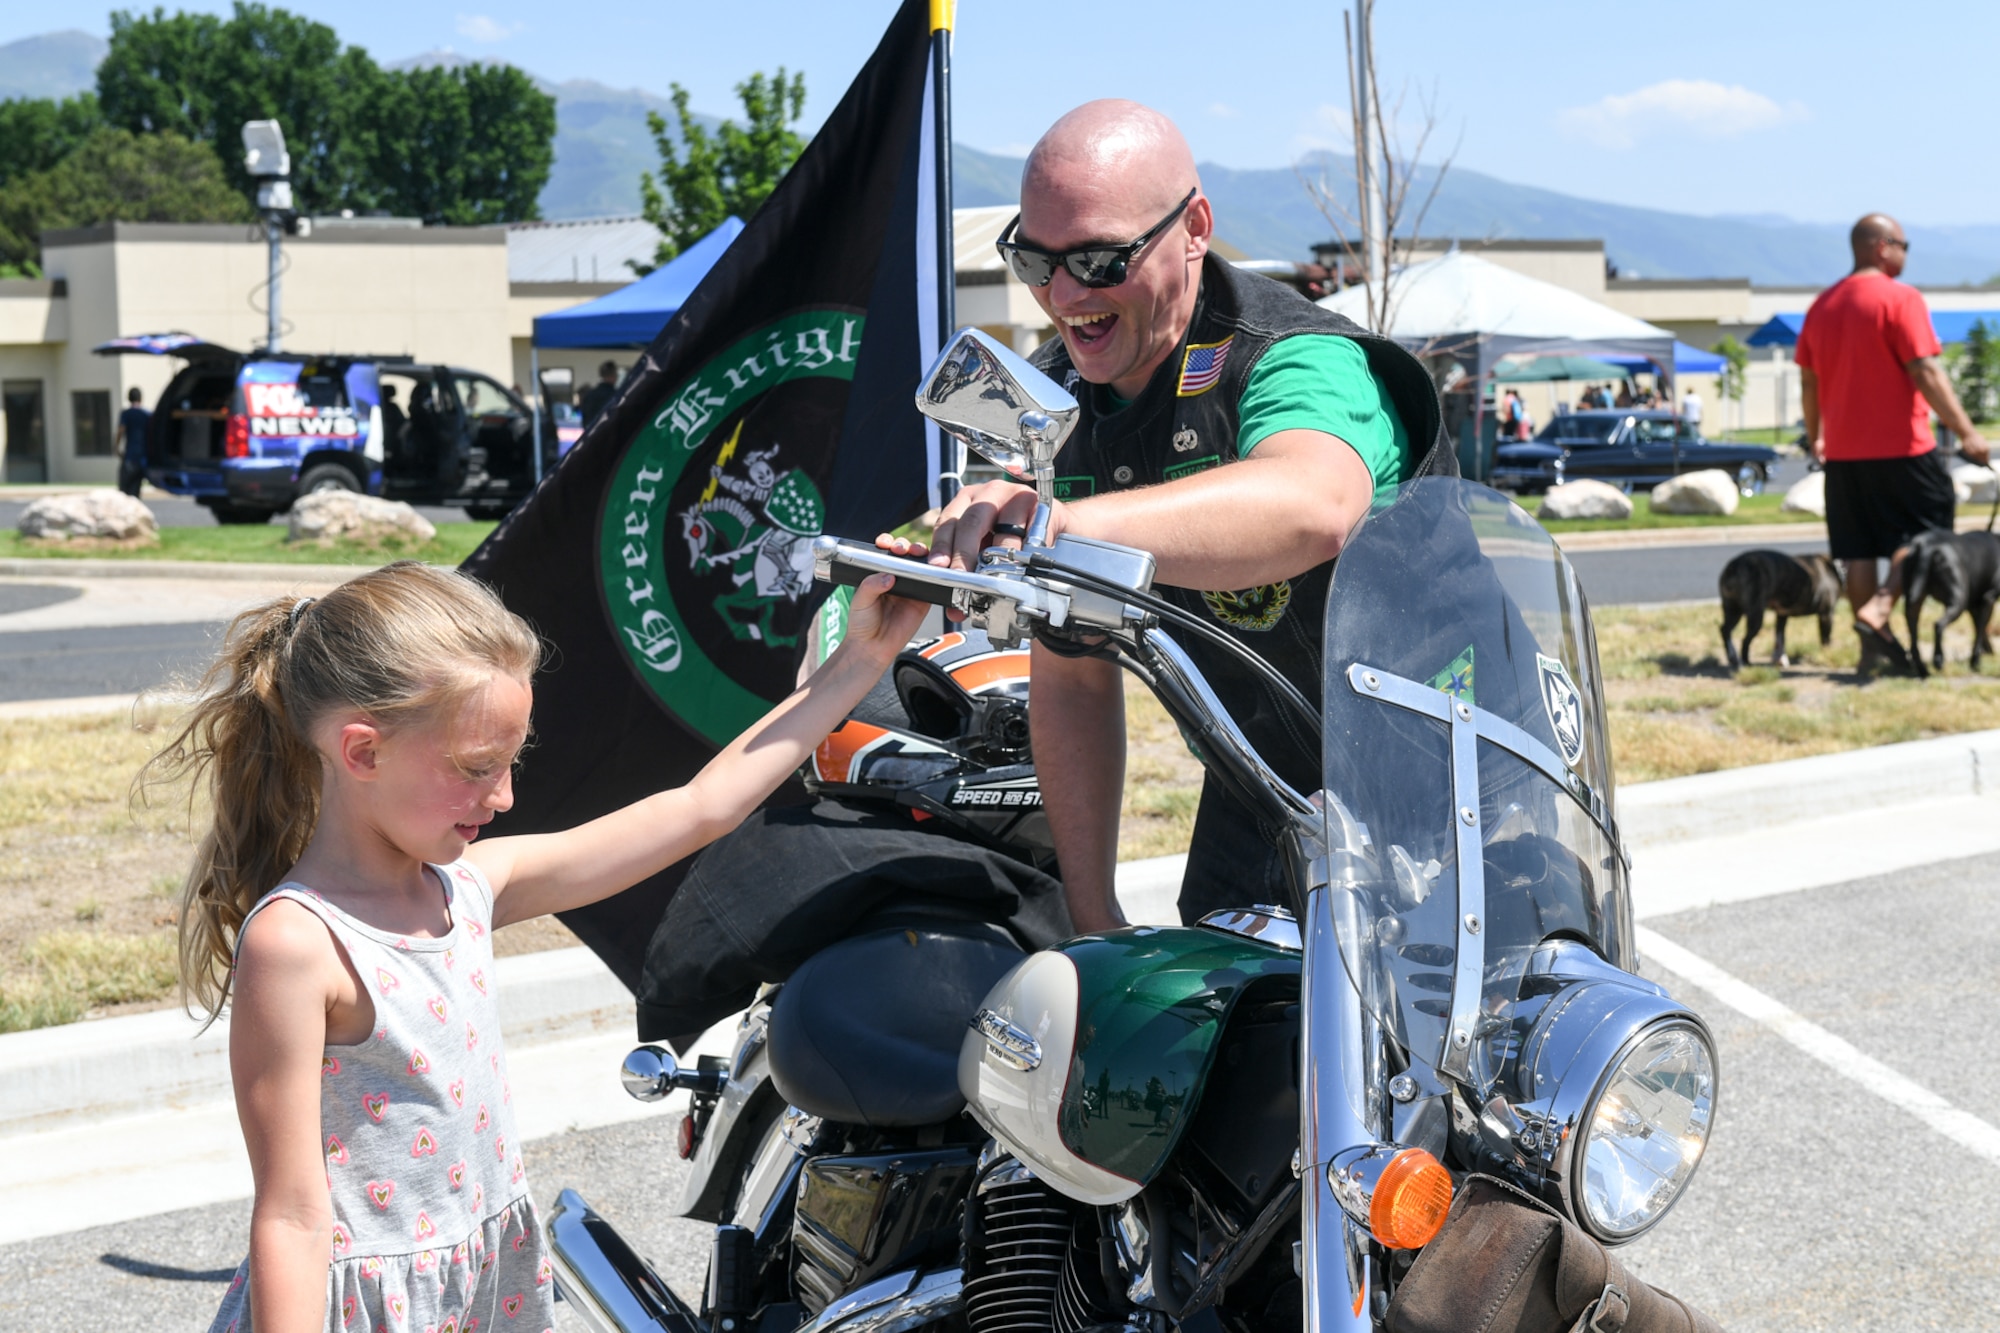 Leila Rose revs the engine of a motorcycle with "Lips," a member of the Green Knights, Chapter 67, during Wheels of Wonder June 8, 2018, at Hill Air Force Base, Utah. Wheels of Wonder provides base families a fun, hands-on experience exploring various types of vehicles. (U.S. Air Force photo by Cynthia Griggs)